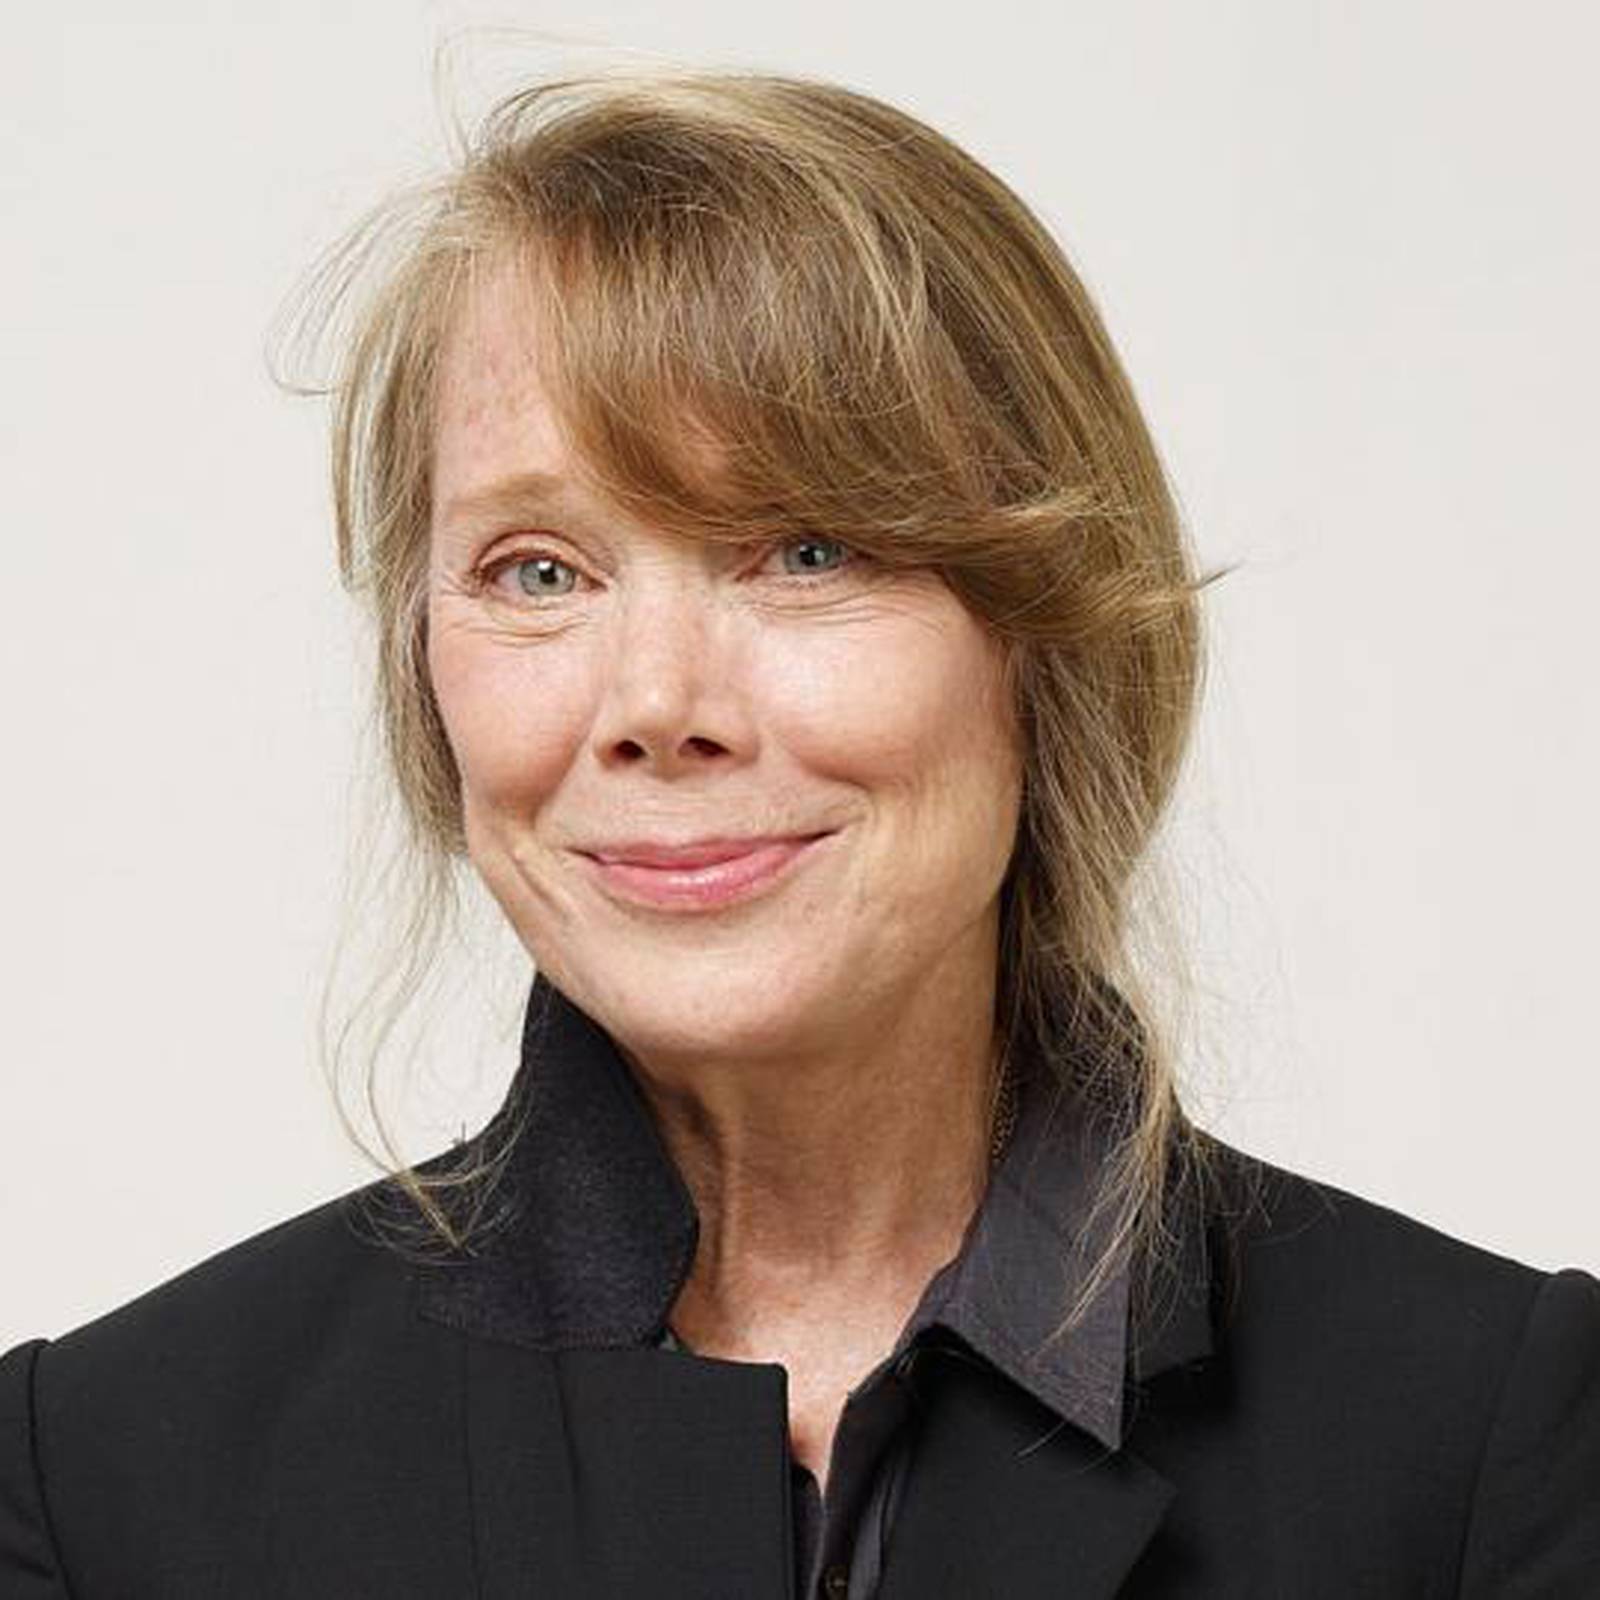 Sissy Spacek's 2 Children: All About Schuyler and Madison